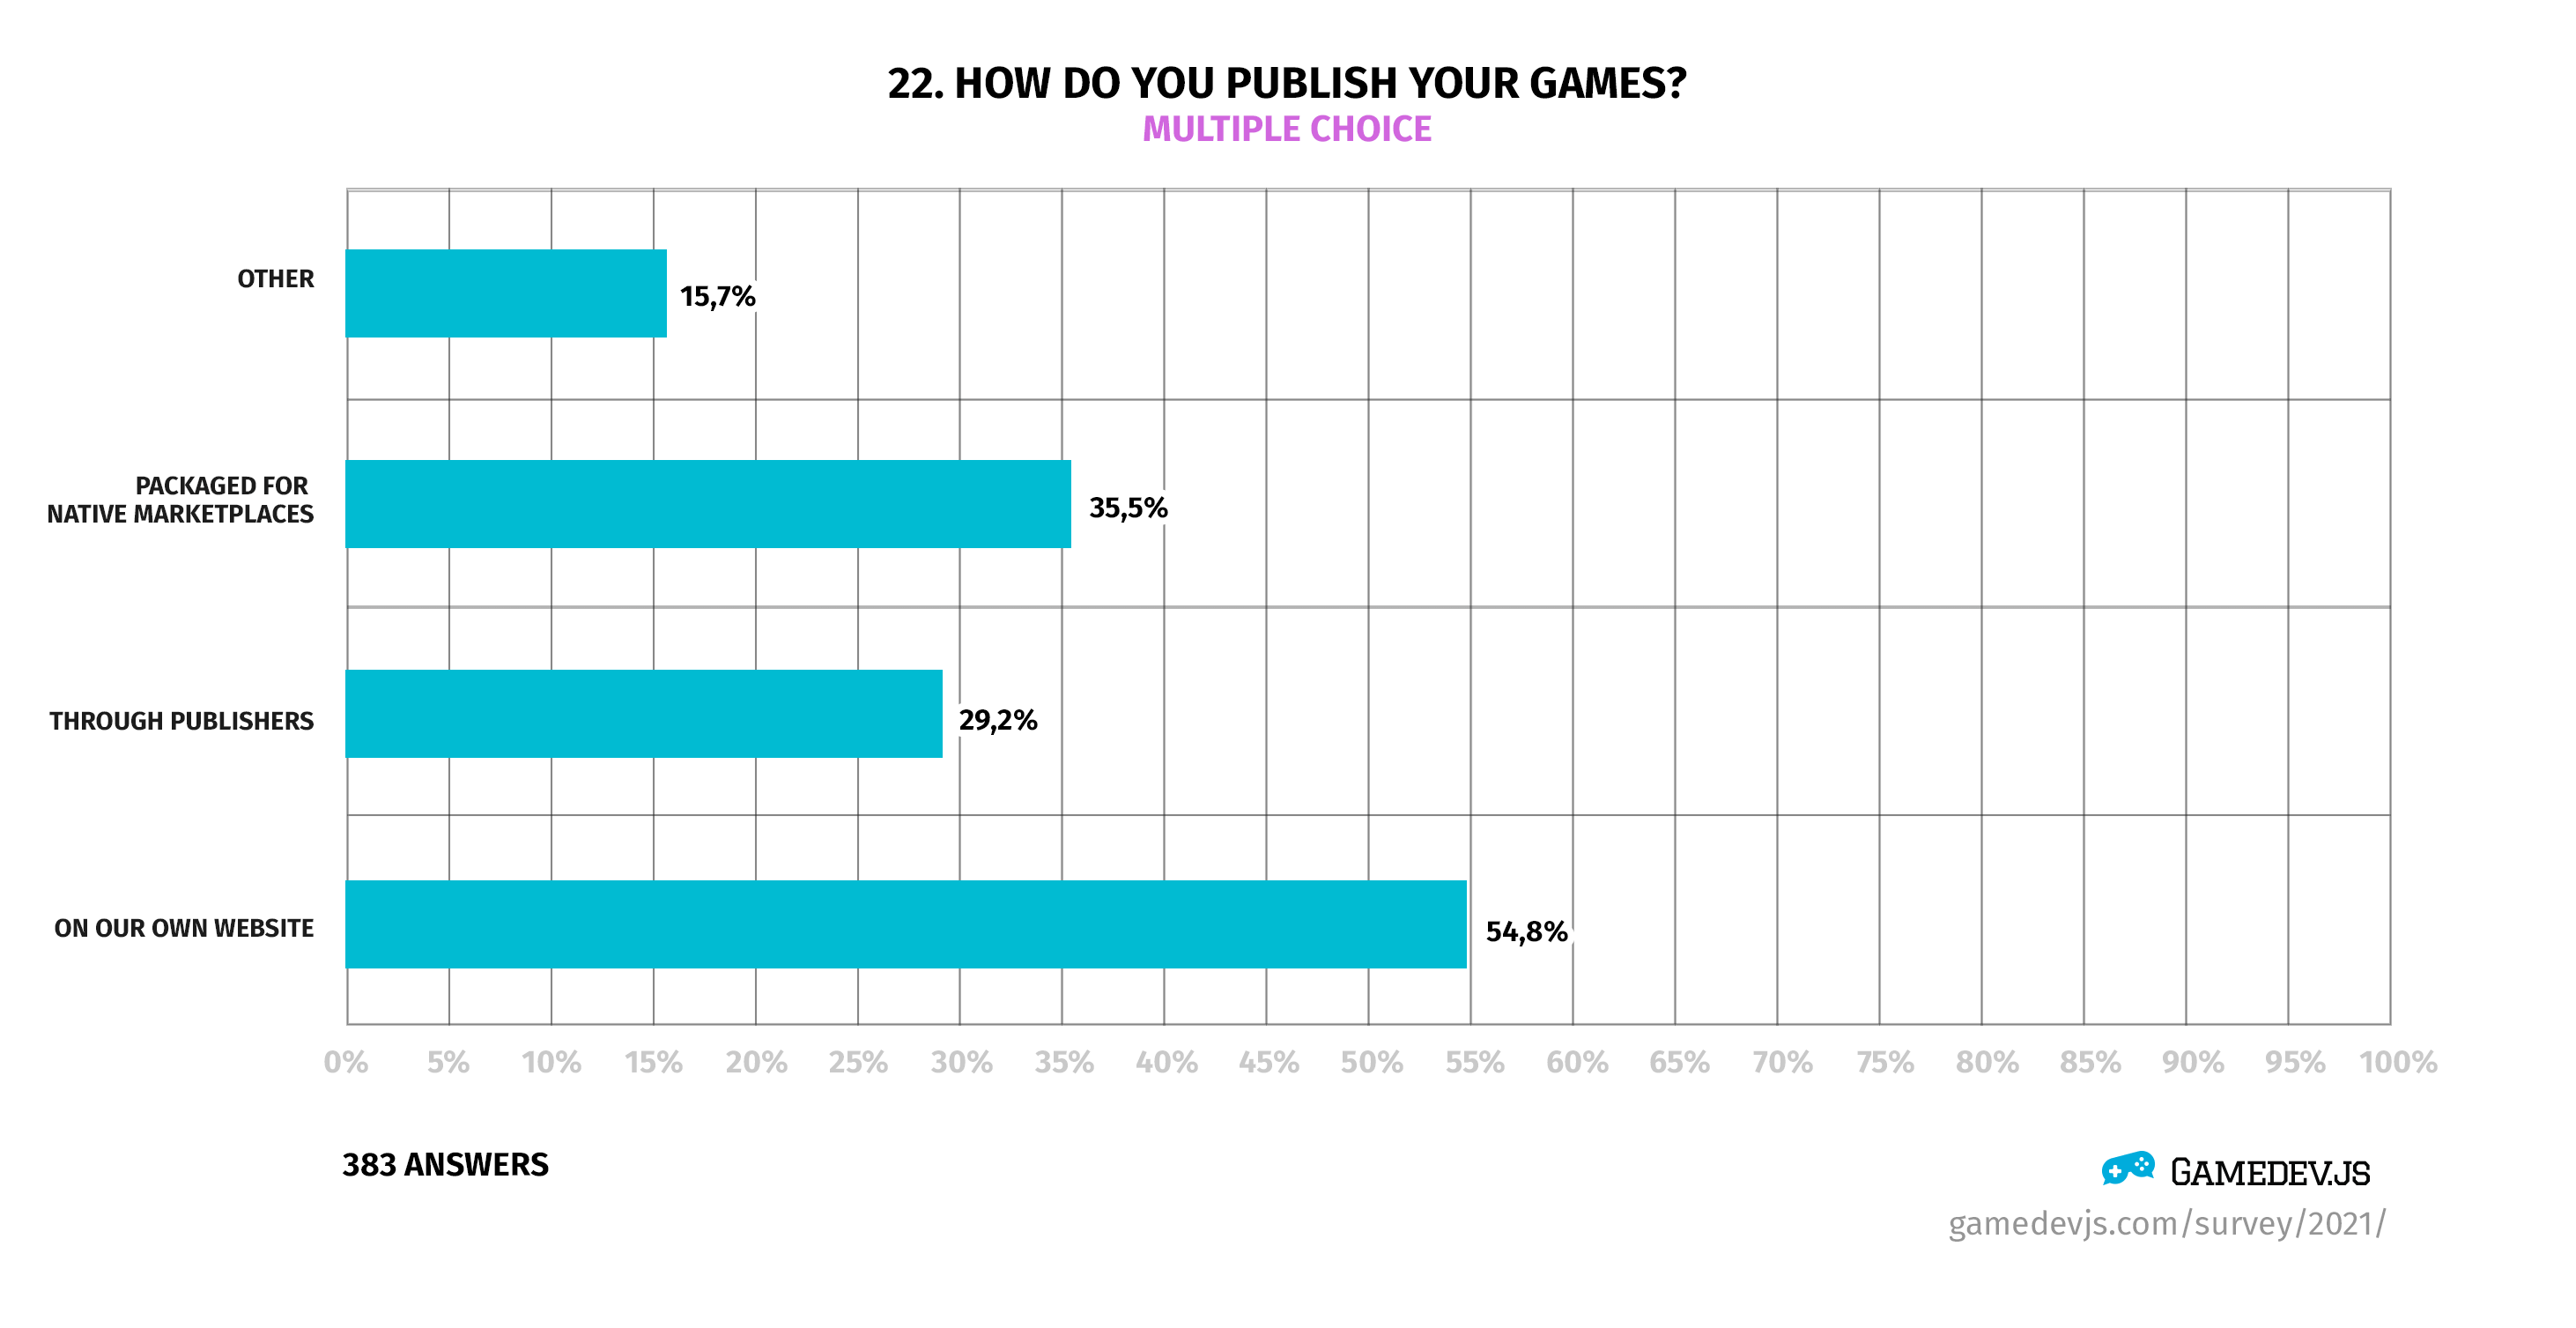 Gamedev.js Survey 2021 - Question #22: How do you publish your games?